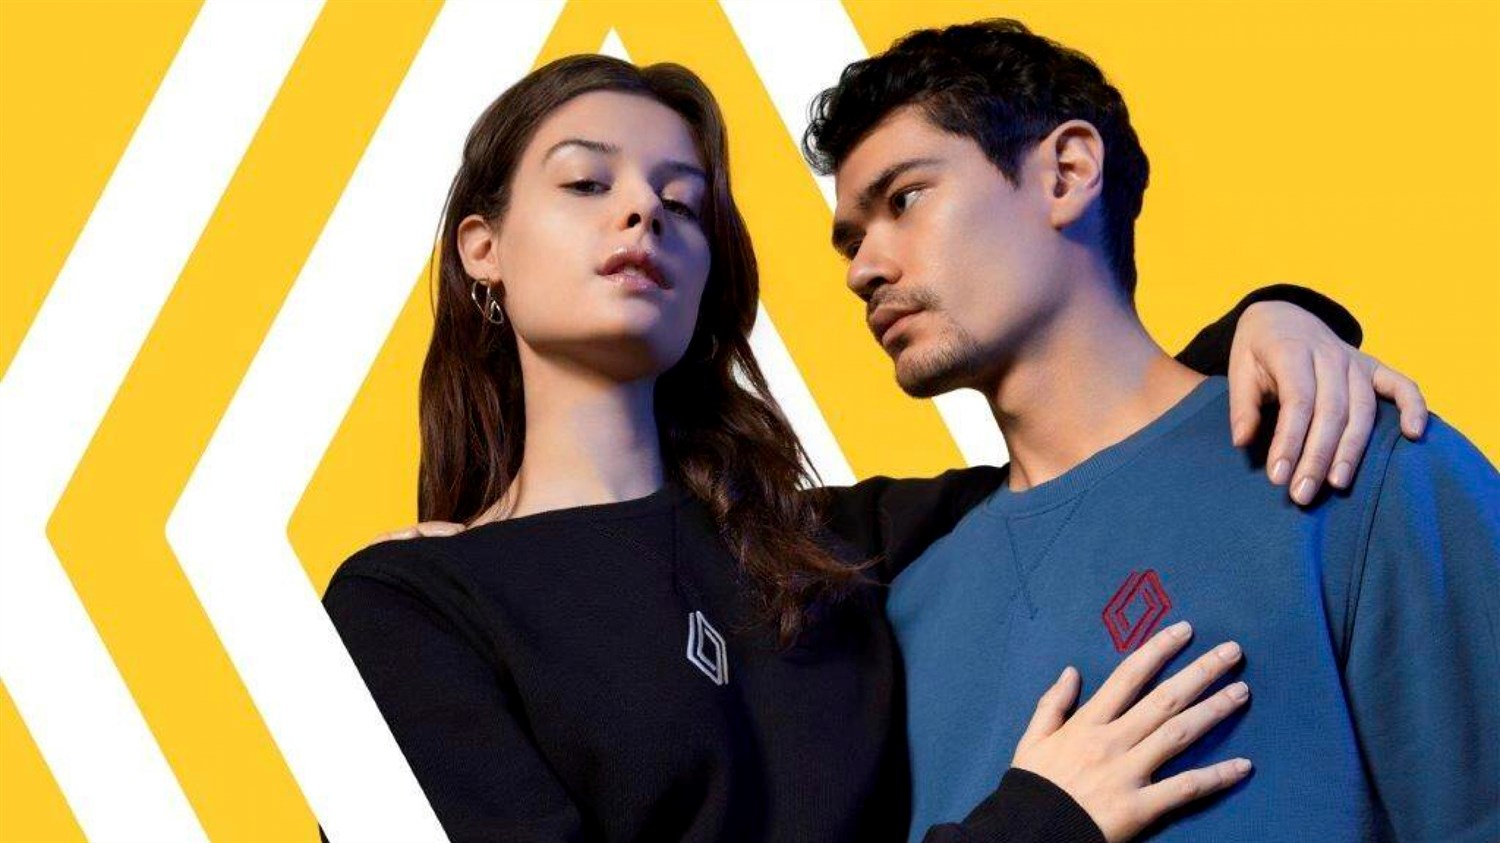 Renault opens virtual museum, 'The Originals', featuring its iconic models and a new merchandise shop